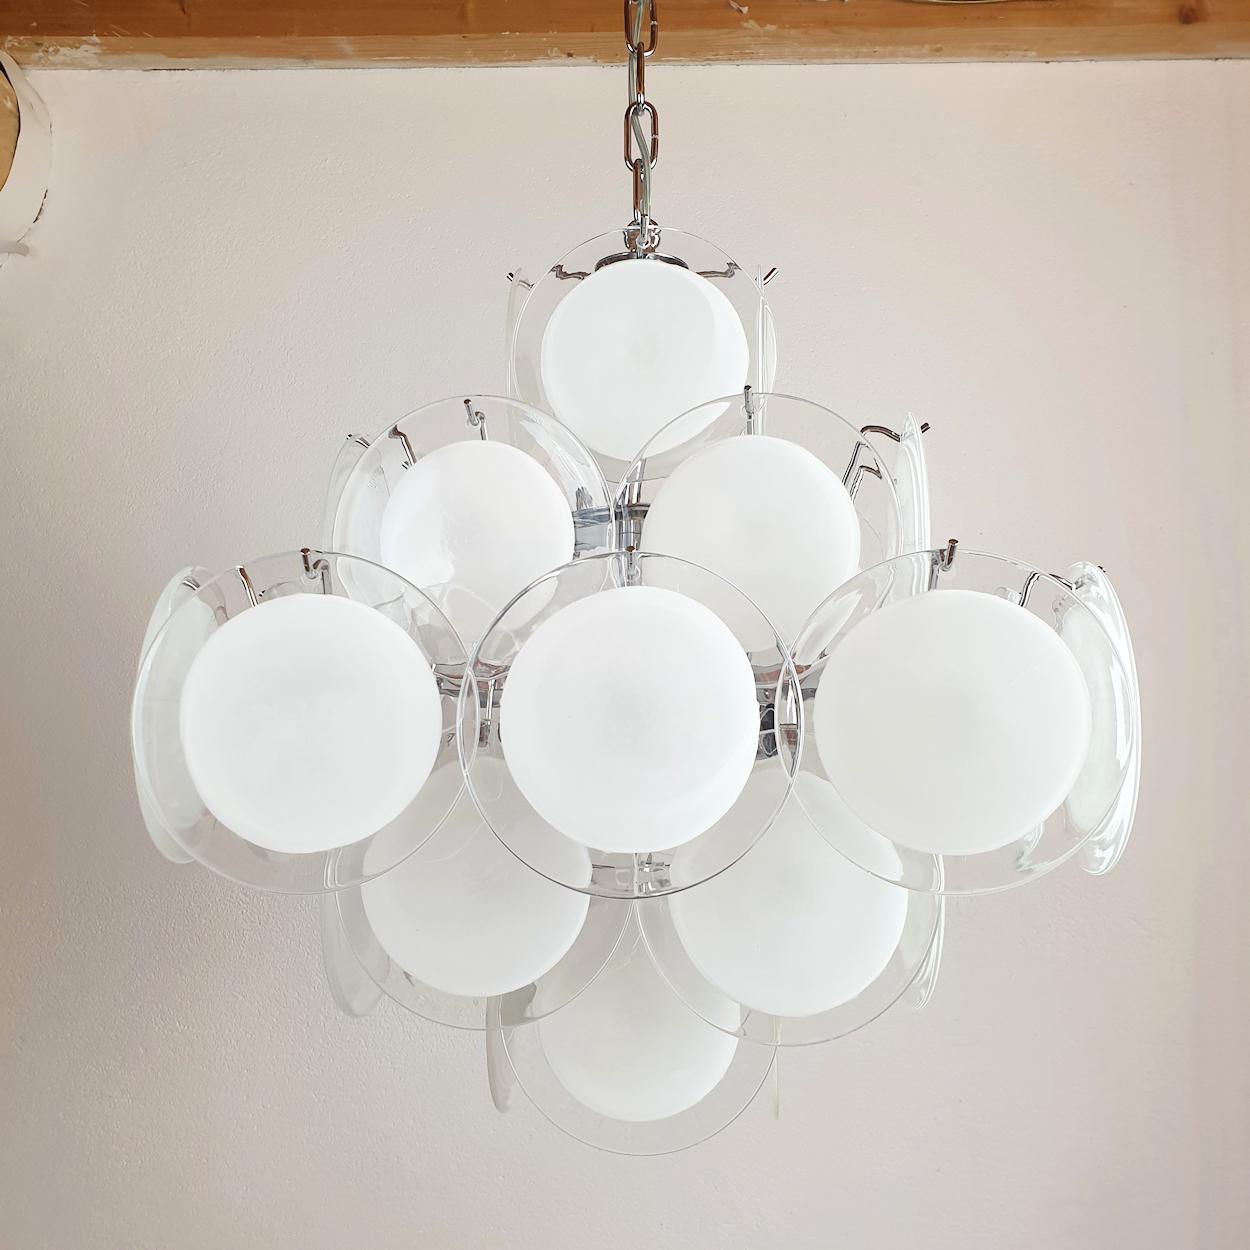 Hand-Crafted White & Clear Murano Glass Mid-Century Modern Disc Chandelier, Vistosi Italy 80s